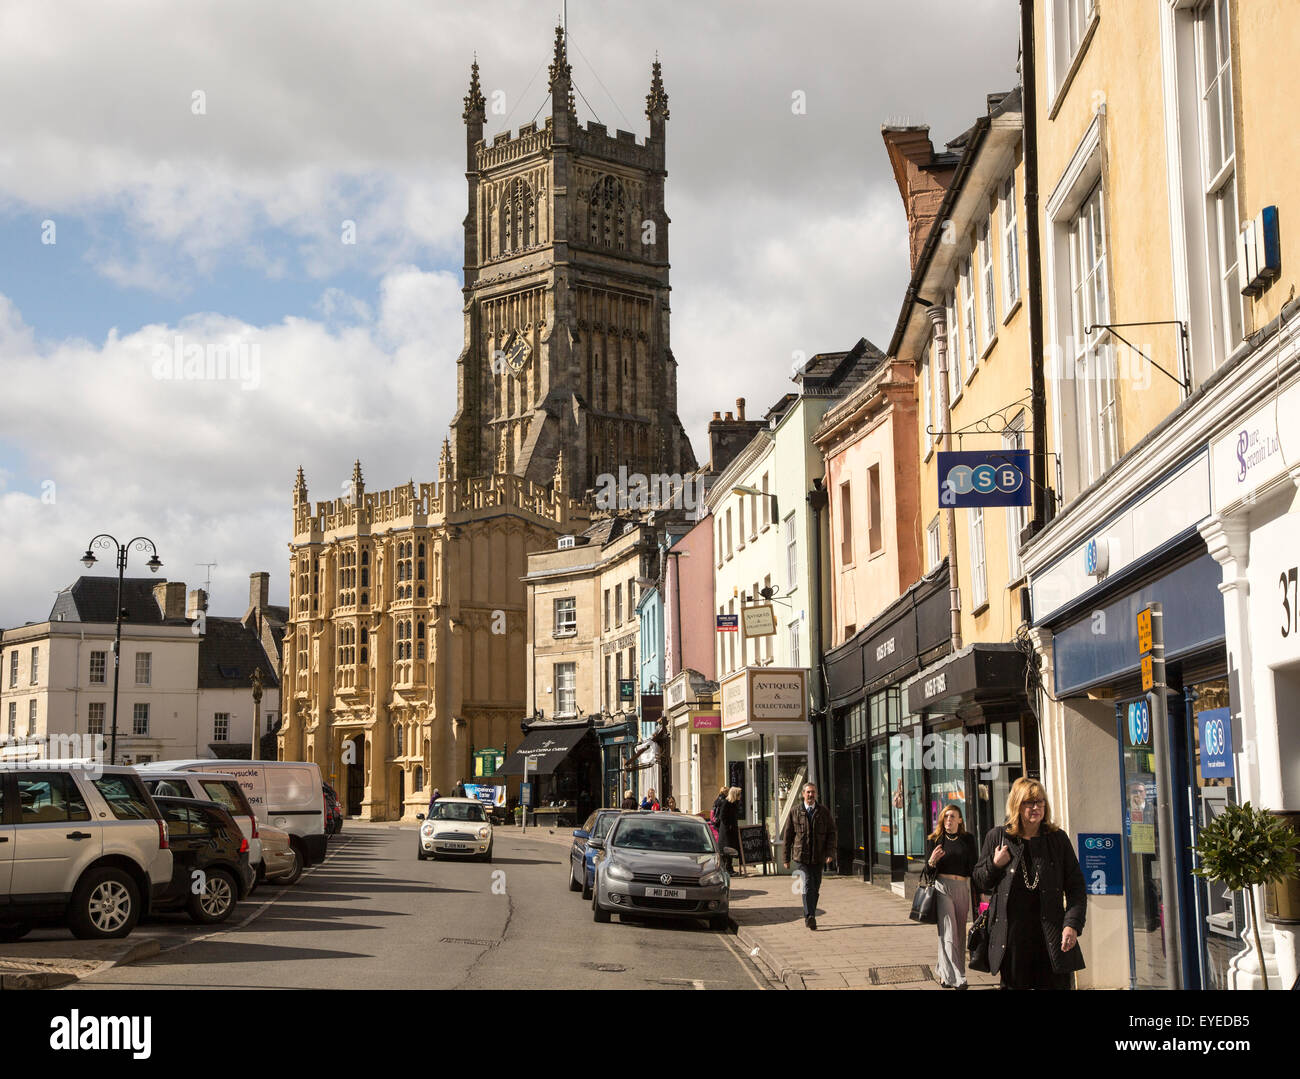 Church and historic buildings in town centre, Cirencester, Gloucestershire, England, UK, Stock Photo